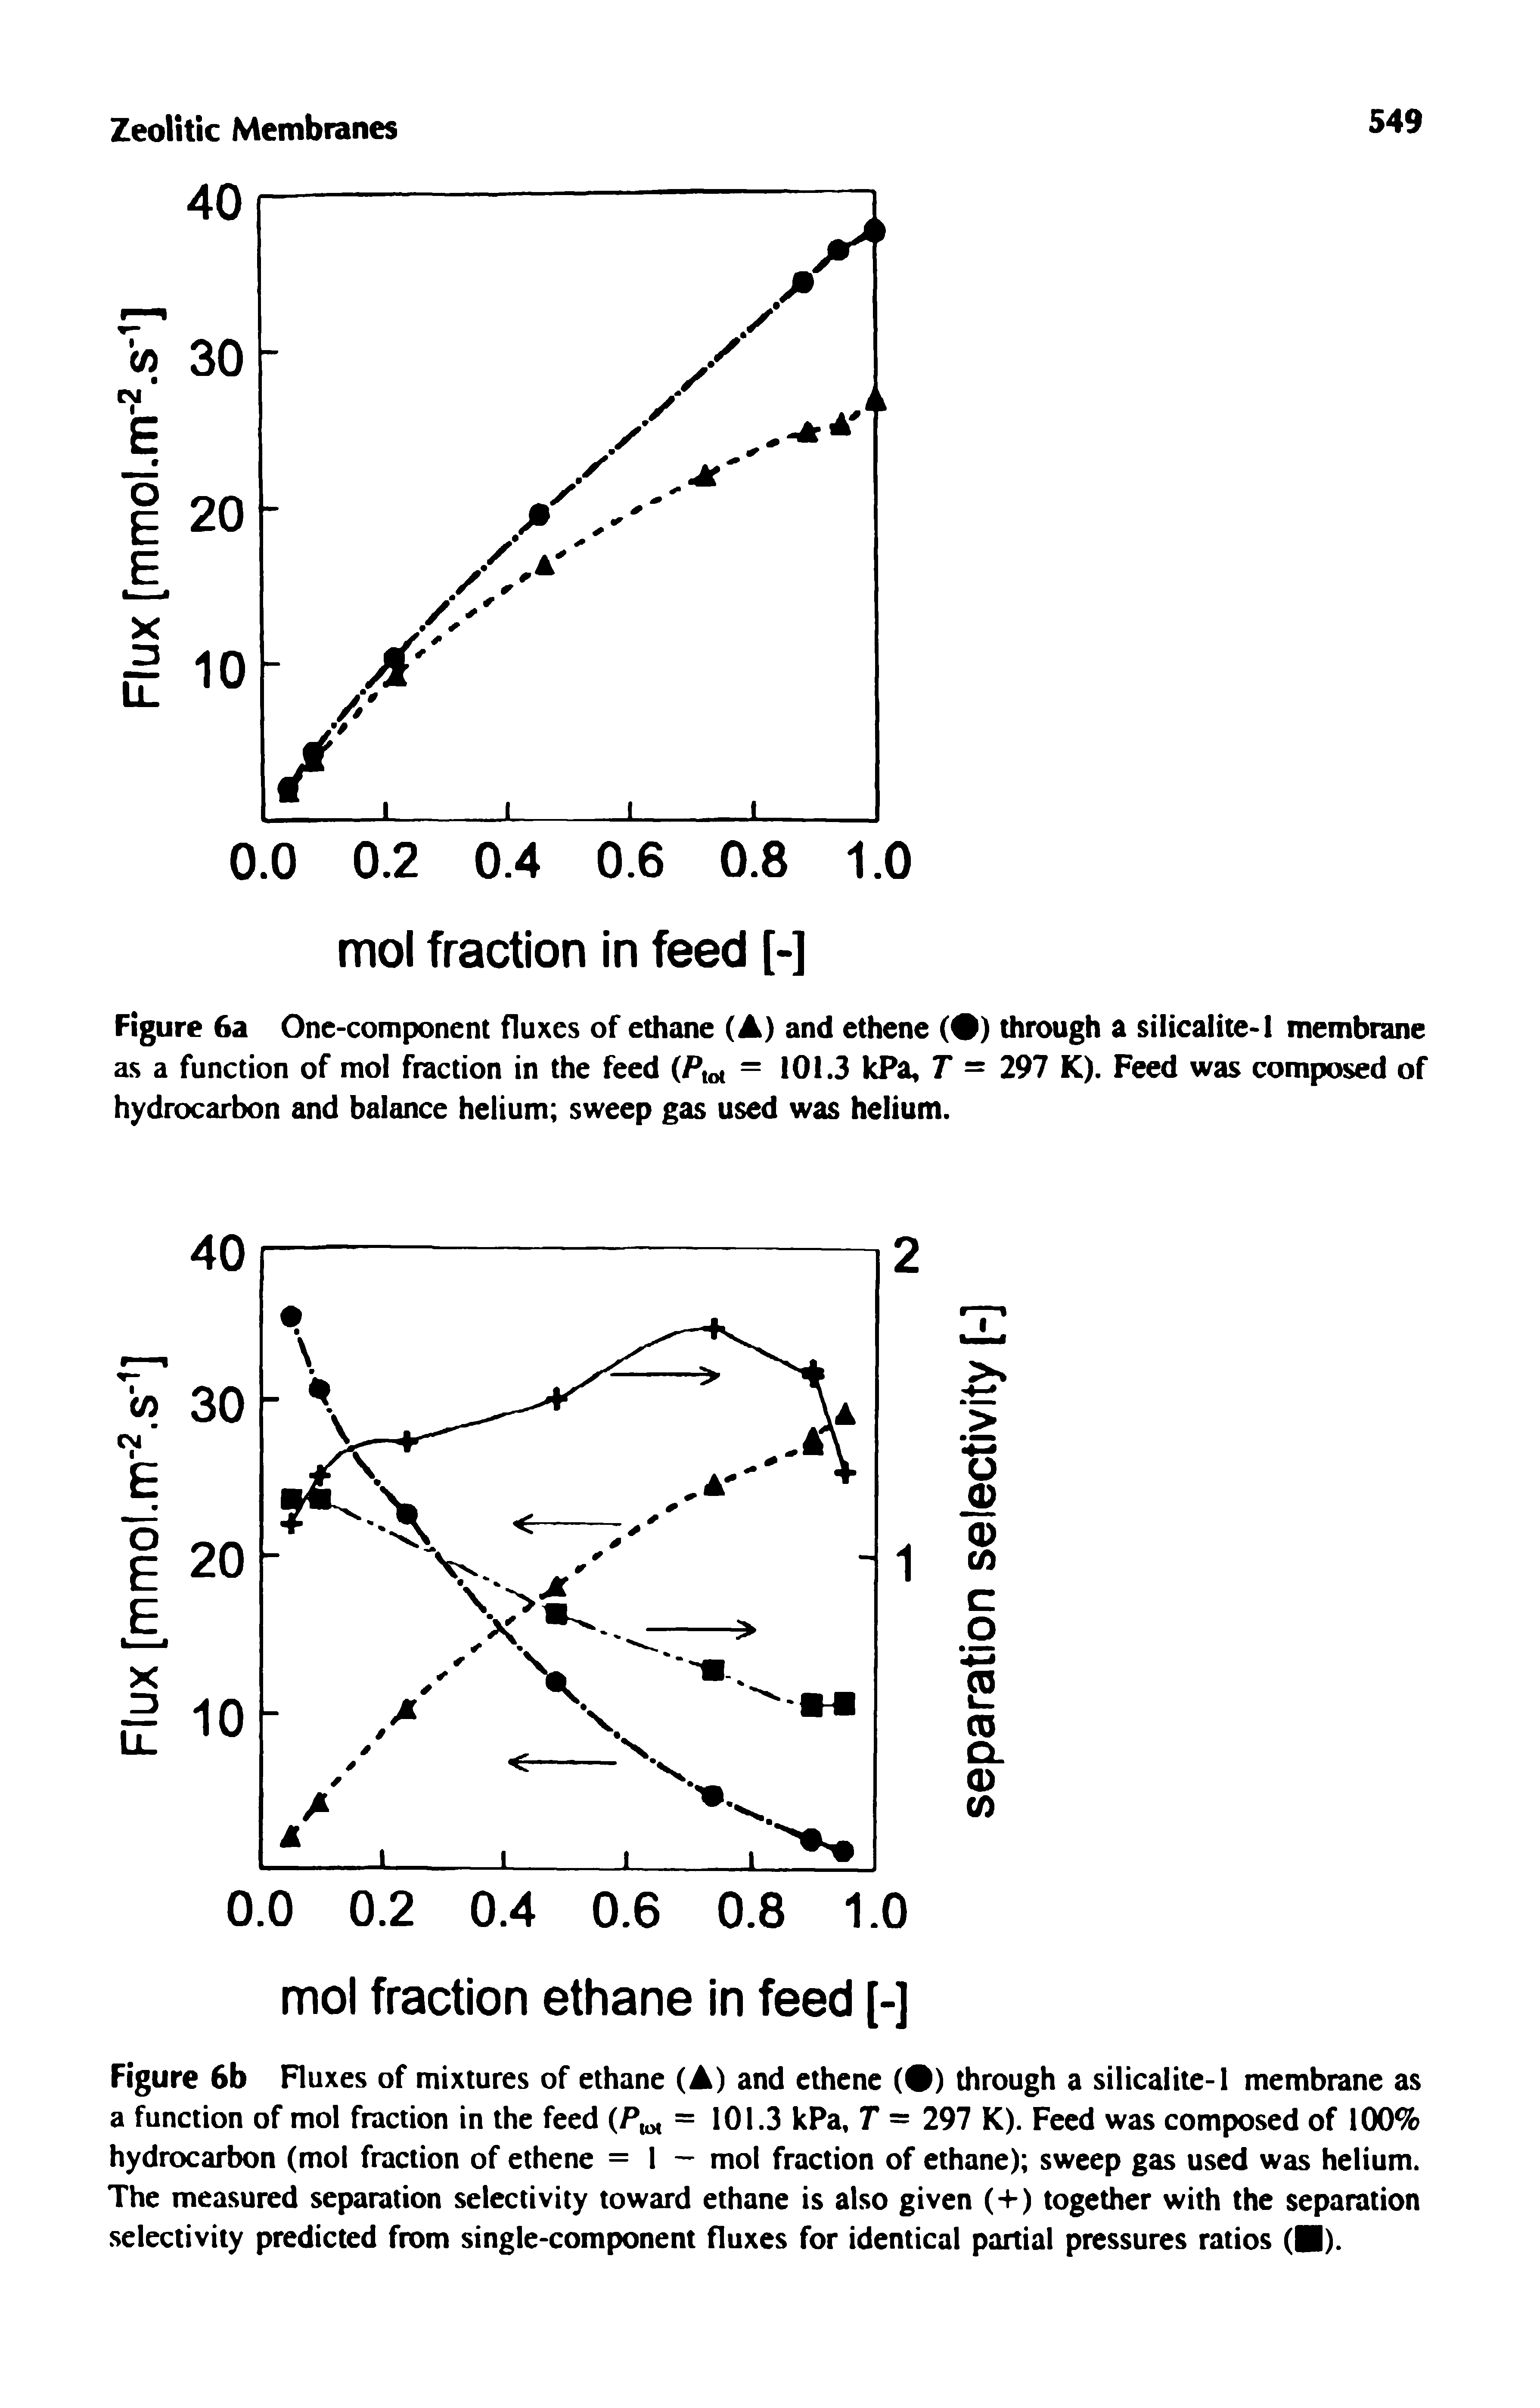 Figure 6b Fluxes of mixtures of ethane (A) and ethene (9) through a silicalite-1 membrane as a function of mol fraction in the feed (P = 101.3 kPa, T = 297 K). Feed was composed of 100% hydrocarbon (mol fraction of ethene = 1 - mol fraction of ethane) sweep gas used was helium. The measured separation selectivity toward ethane is also given (+) together with the separation selectivity predicted from single-component fluxes for identical partial pressures ratios ( ).